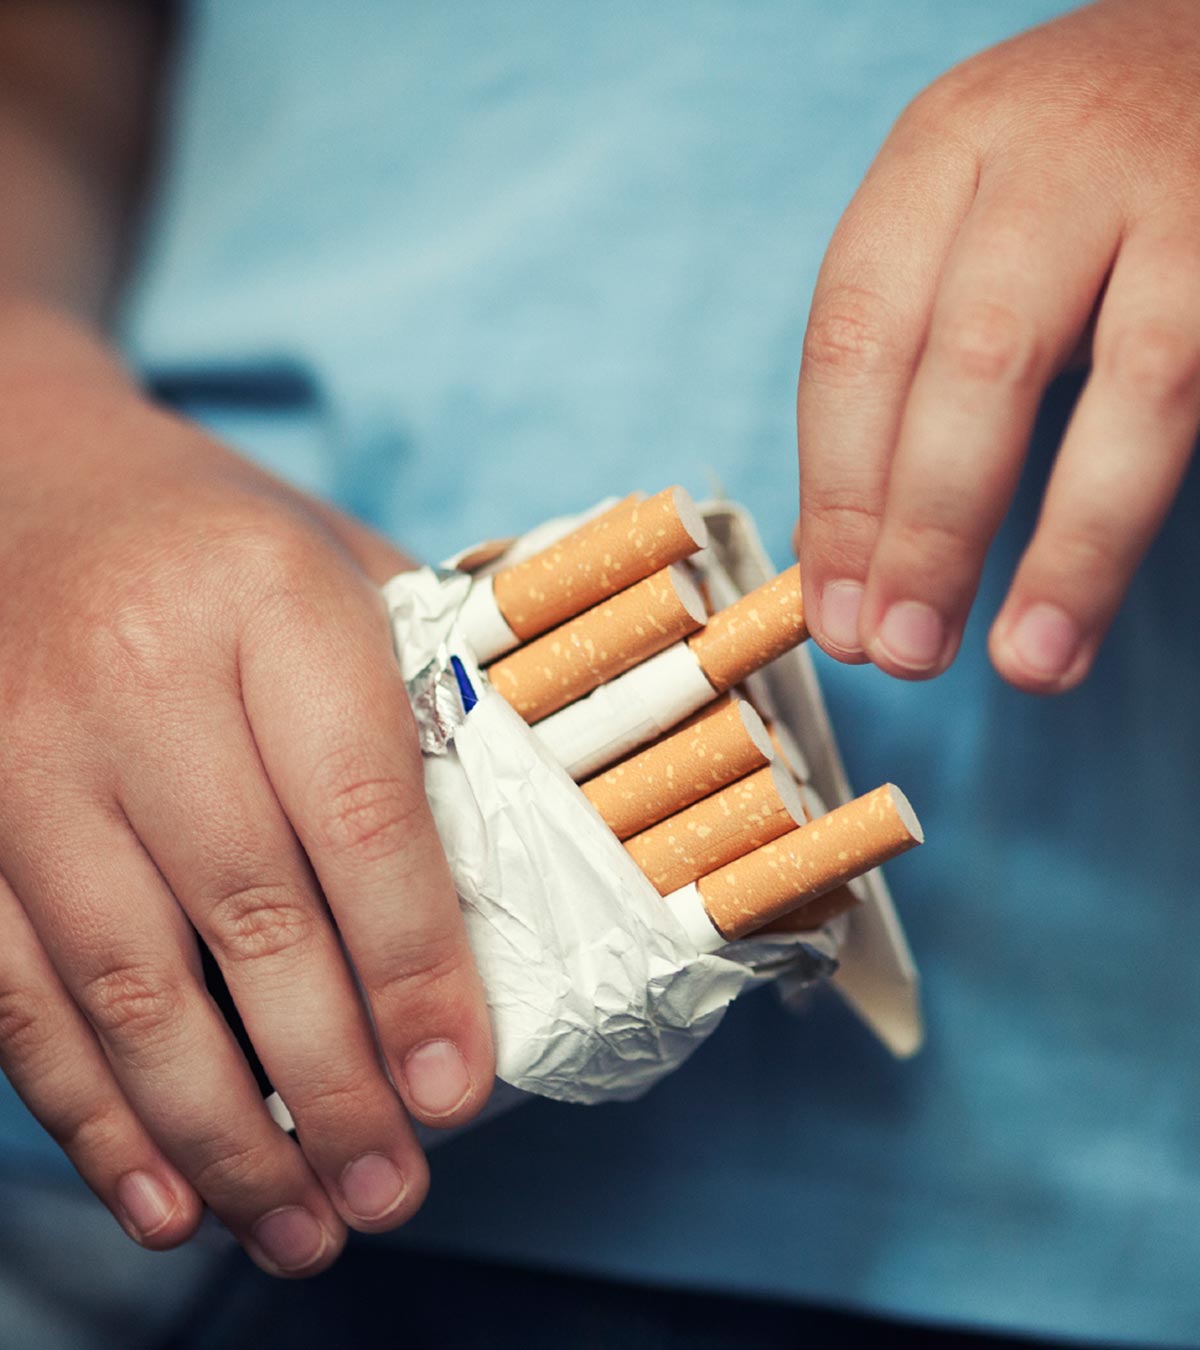 40+ Dangerous Smoking Facts To Share With Your Kids